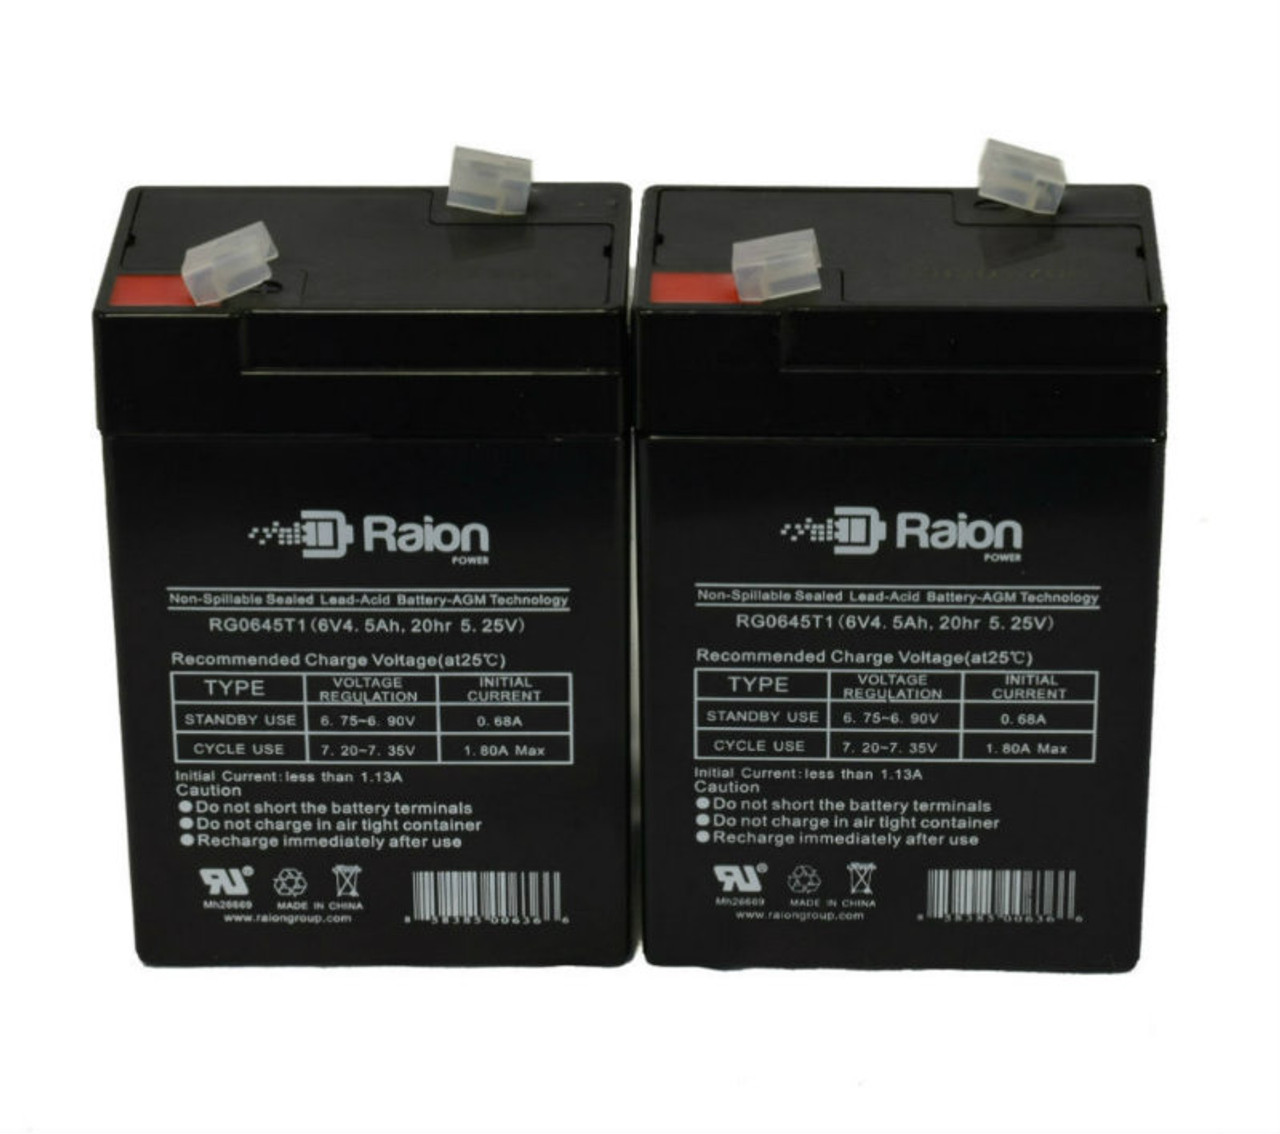 Raion Power 6 Volt 4.5Ah RG0645T1 Replacement Battery for Sheng Yang SY640 - 2 Pack